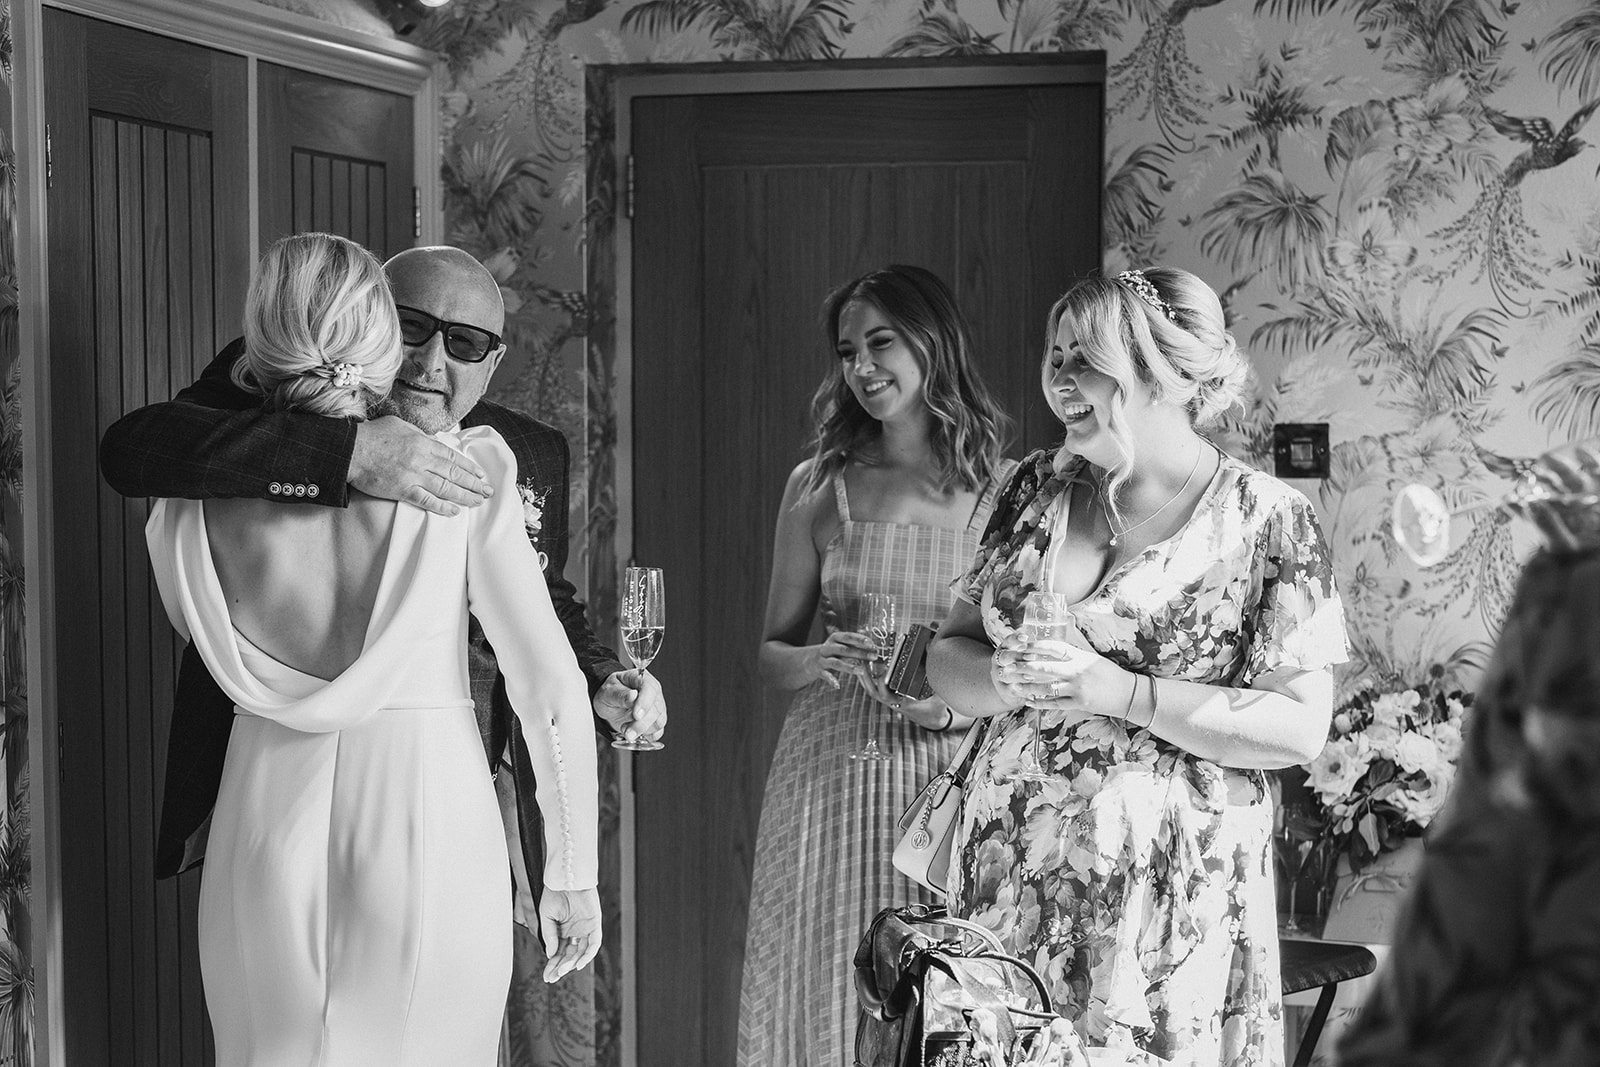 The Chequers Inn Wedding Photography - father of the bride, giving his daughter, a hug